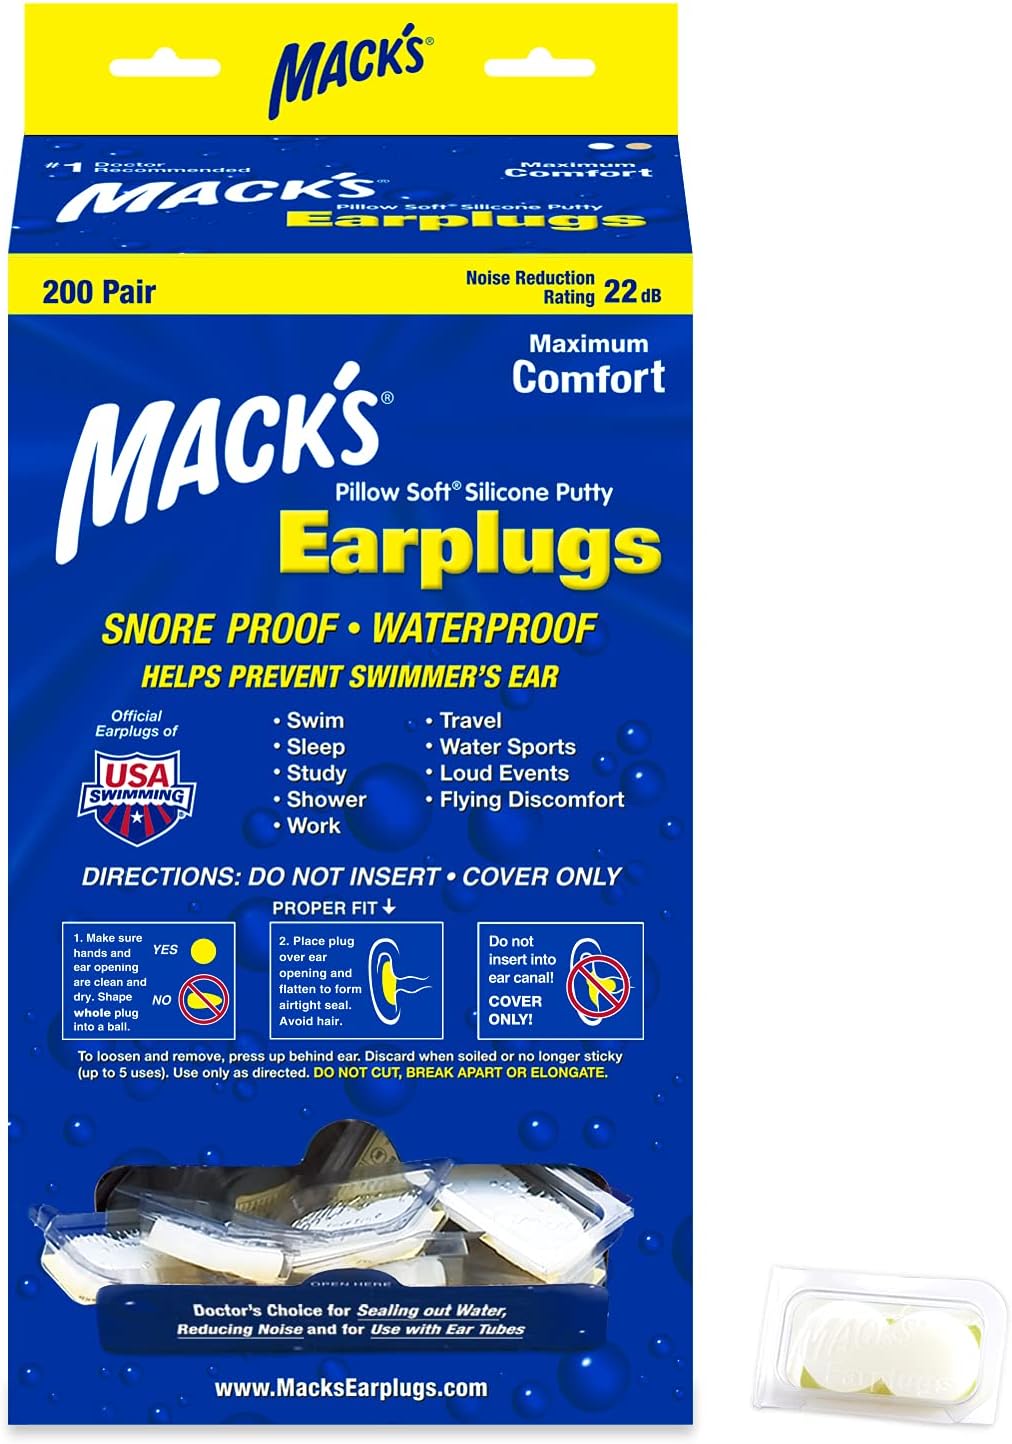 Mack's Pillow Soft Silicone Earplugs - 200 Pair Dispenser - The Original Moldable Silicone Putty Ear Plugs for Sleeping, Snoring, Swimming, Travel, Concerts and Studying | Made in USA